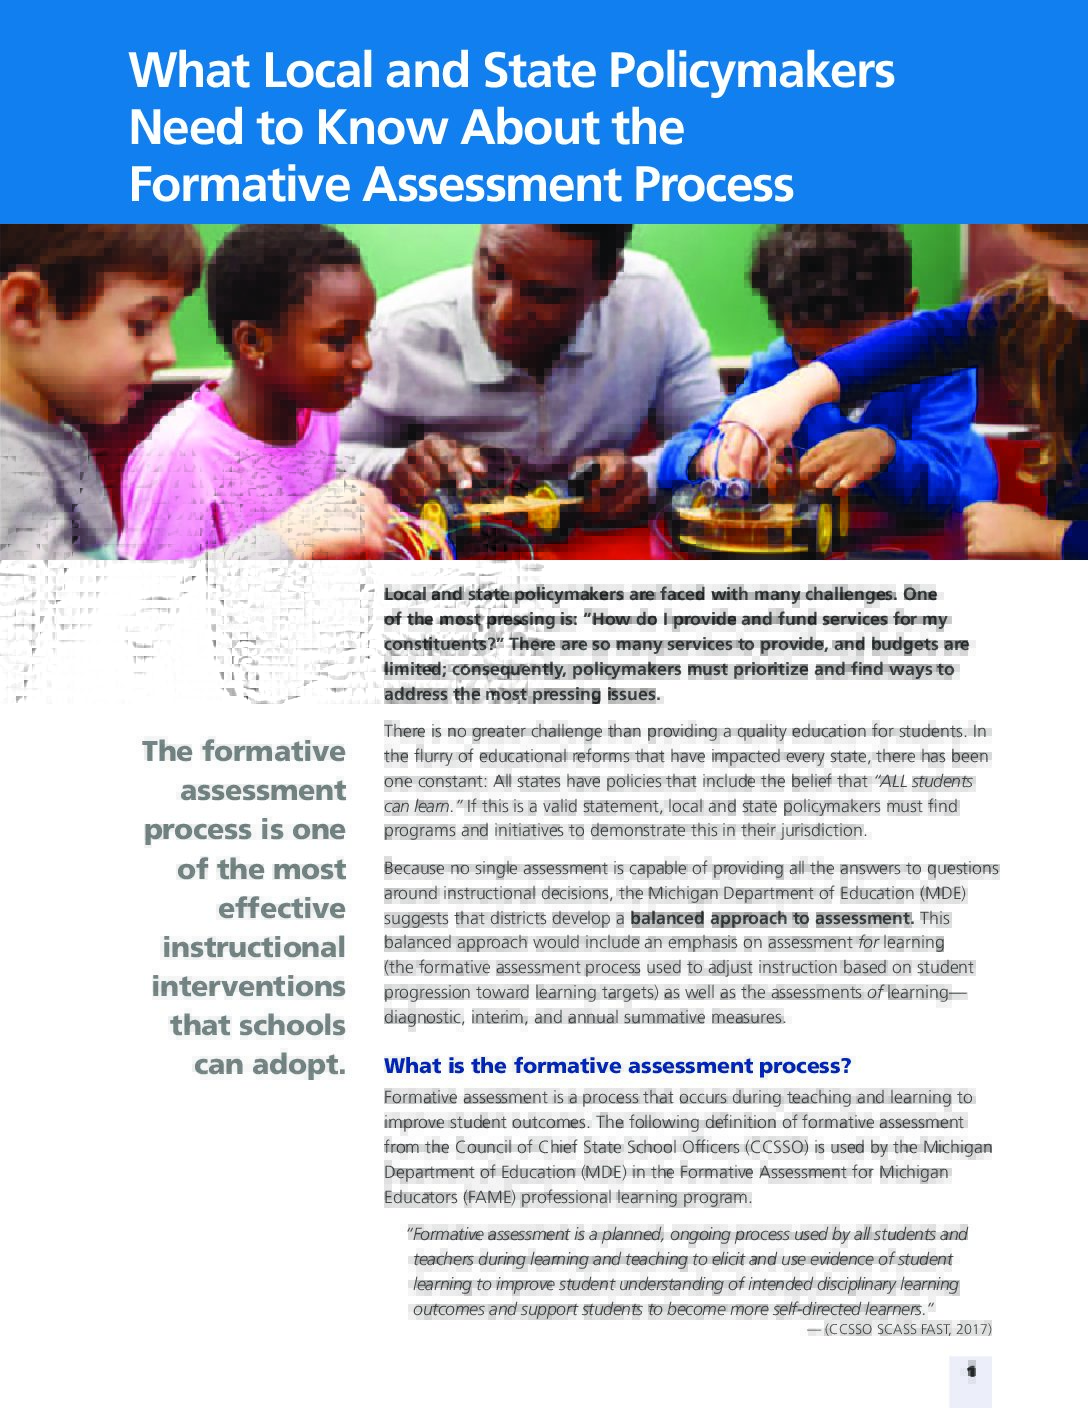 What Policymakers Need to Know about the Formative Assessment Process Thumbnail